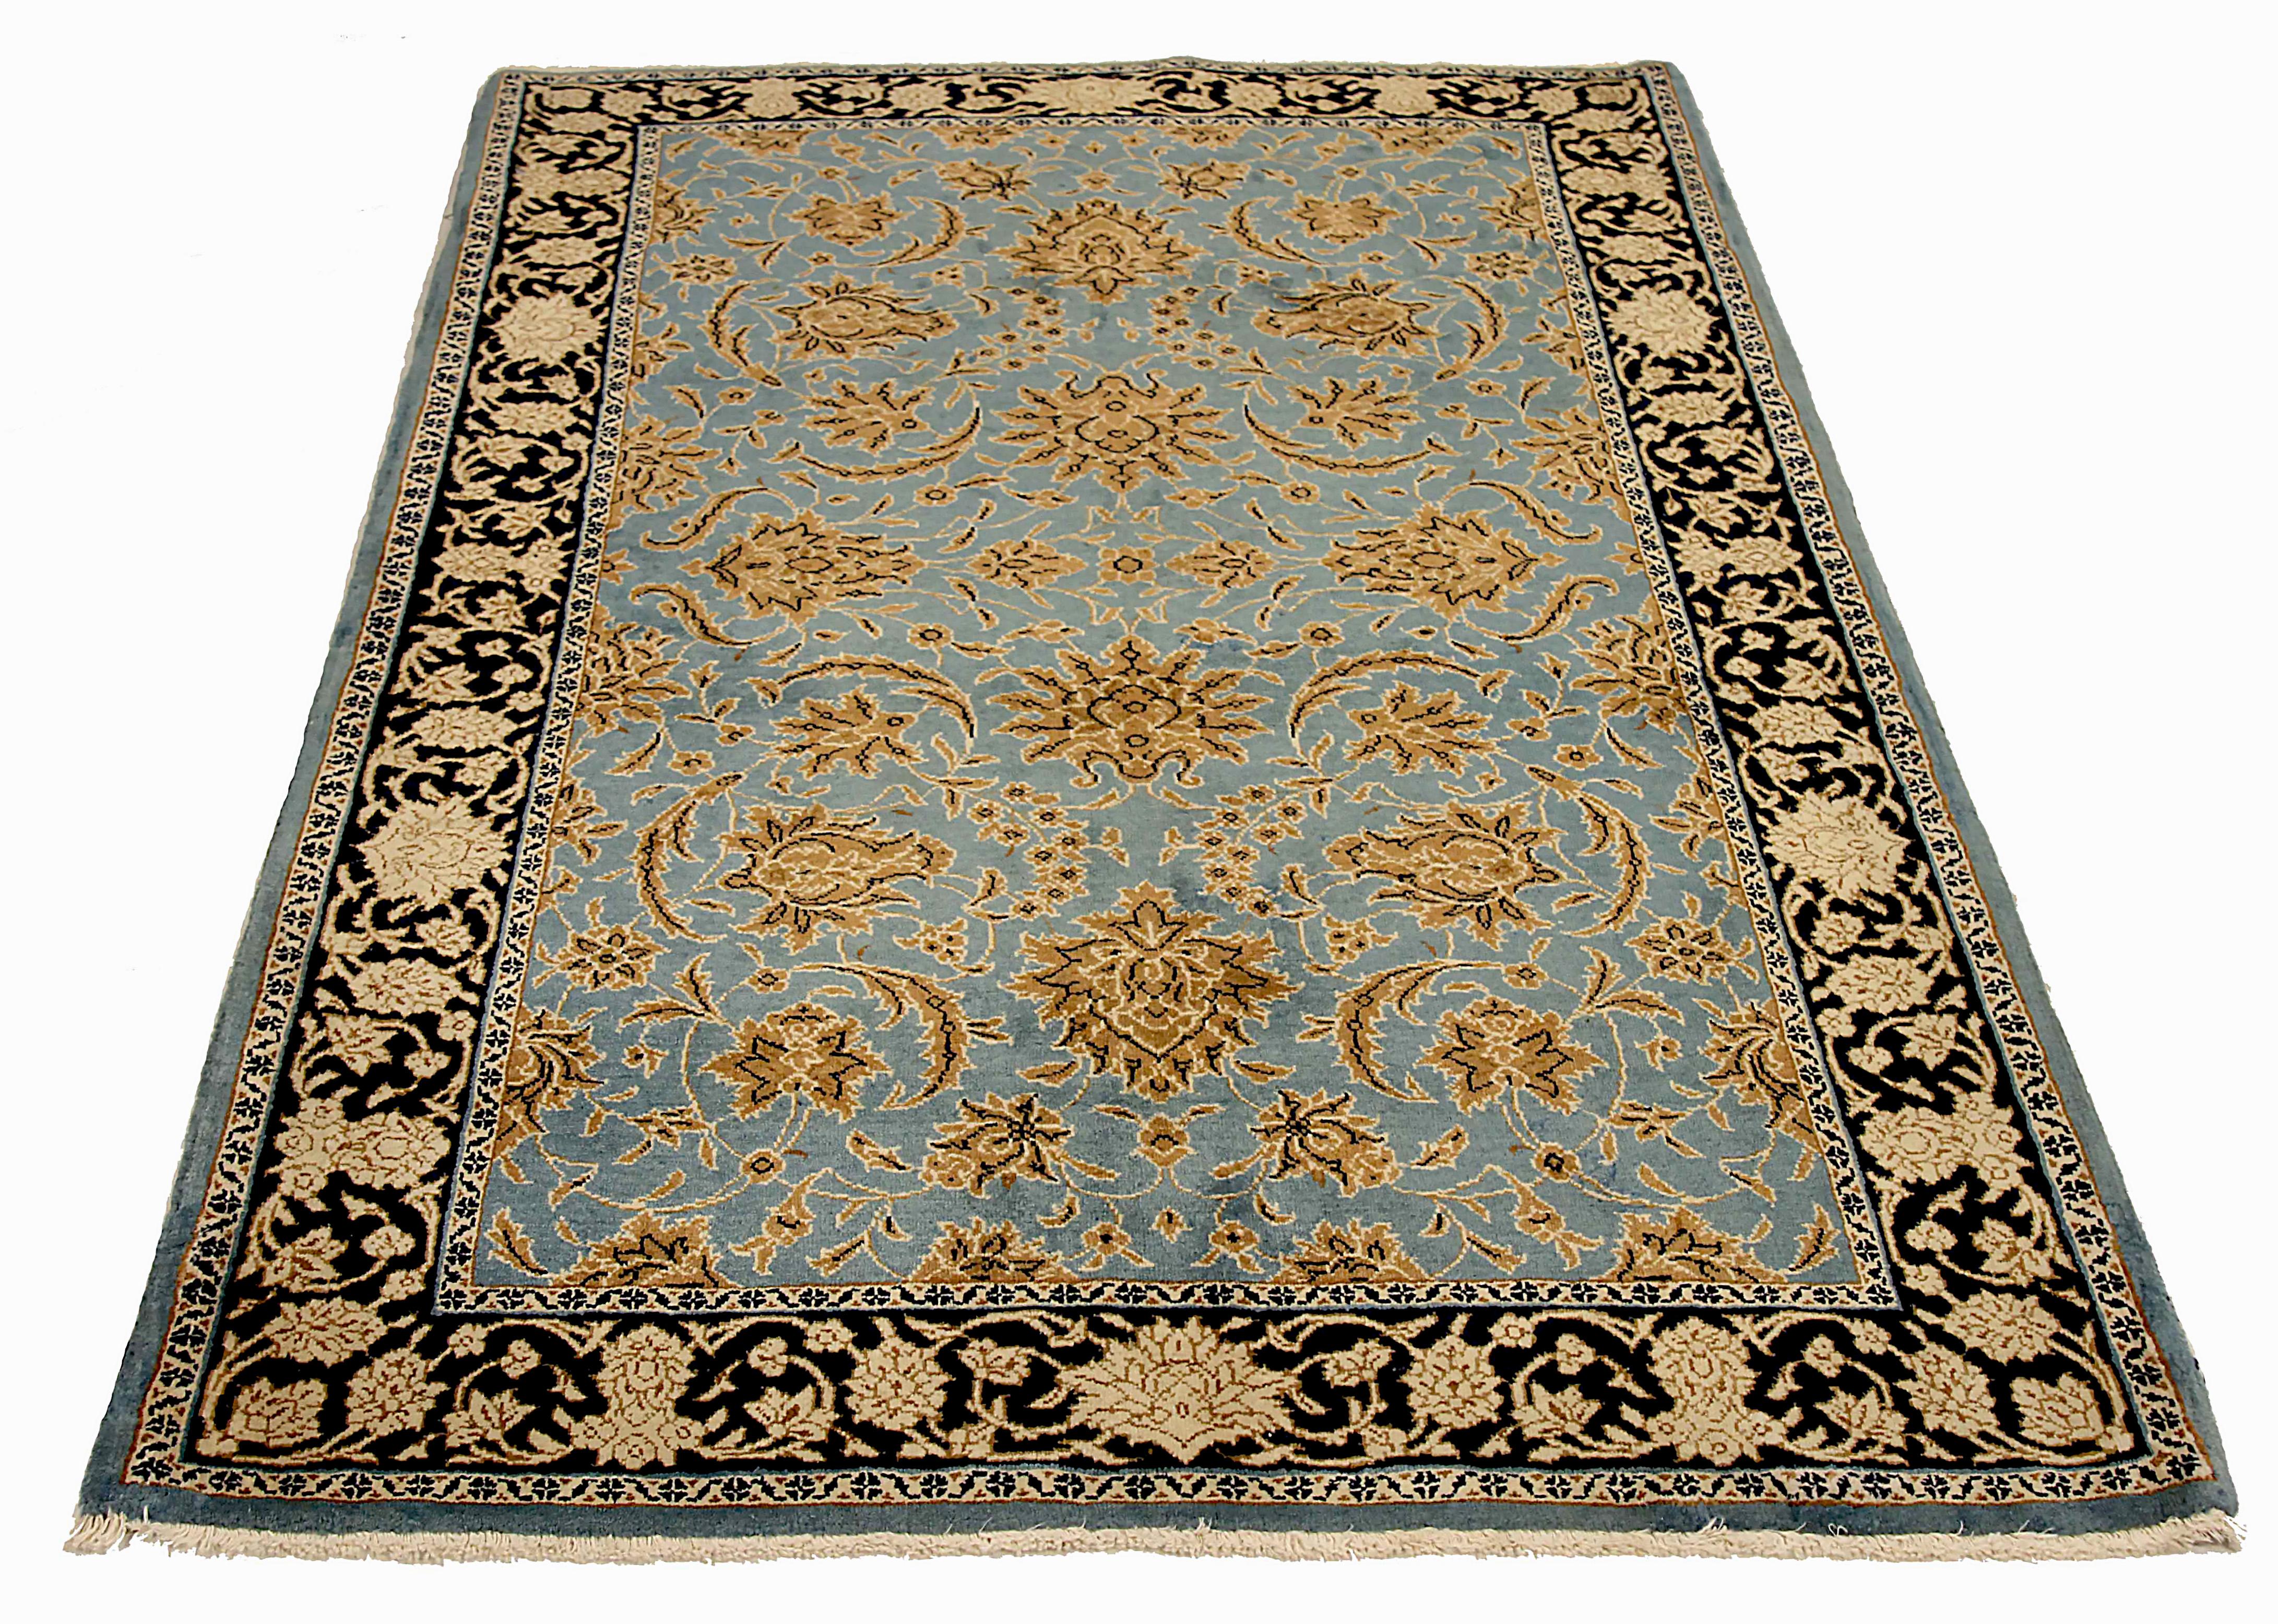 Antique Persian area rug handwoven from the finest sheep’s wool. It’s colored with all-natural vegetable dyes that are safe for humans and pets. It’s a traditional Sarouk design handwoven by expert artisans. It’s a lovely area rug that can be